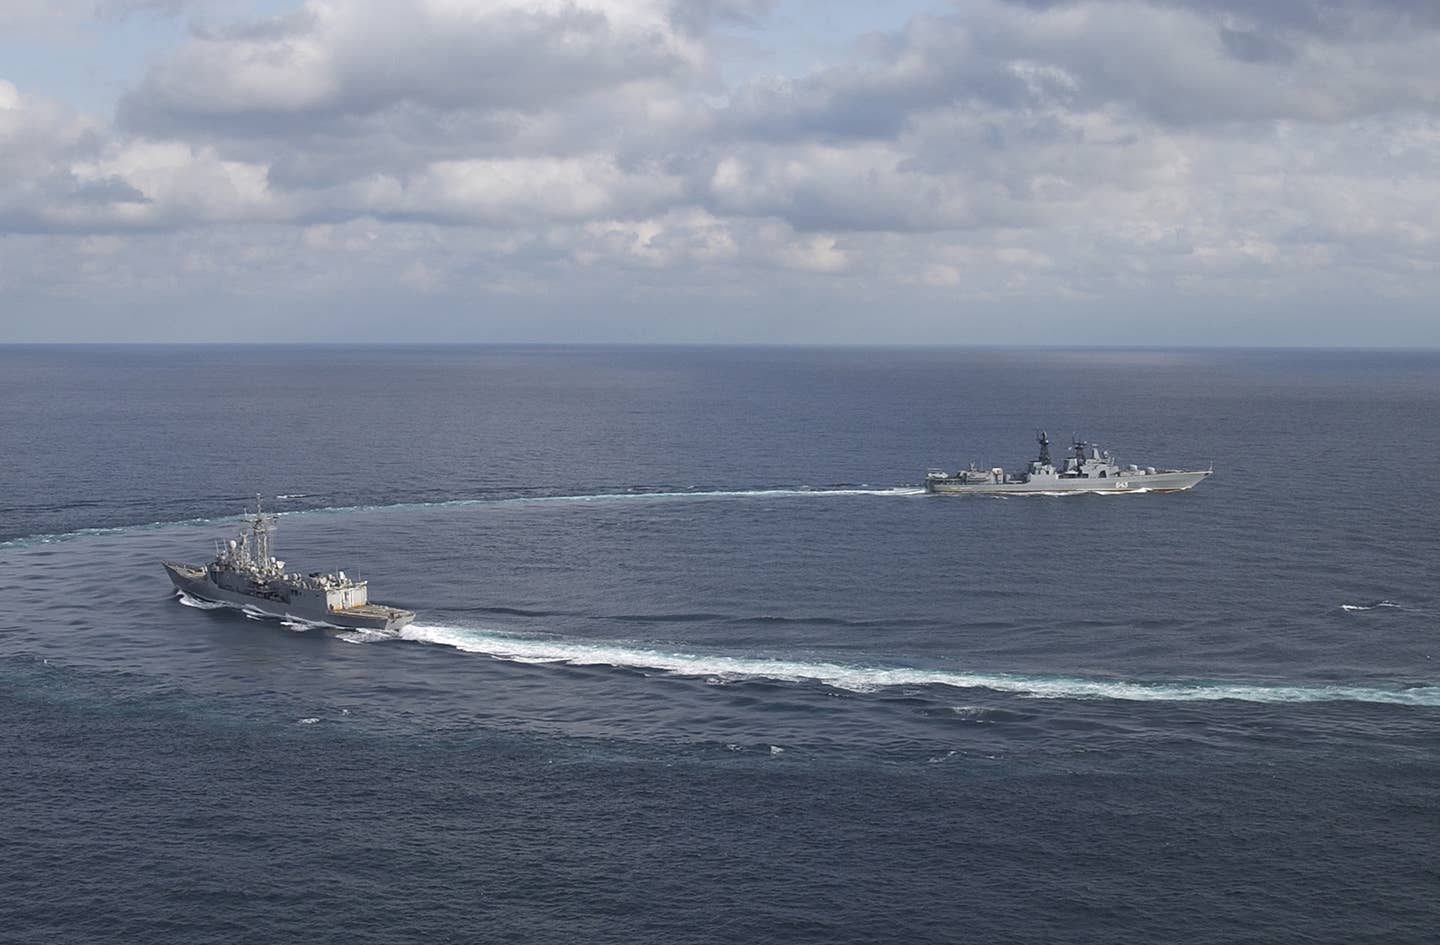 message-editor%2F1644862060619-us_navy_031109-n-8590g-002_uss_vandegrift_and_russian_destroyer_marshal_shaposhnikov_dd_543_maneuver_in_formation_during_a_russian_passing_exercise_passex_as_a_joint_foreign_naval_exercise.jpg